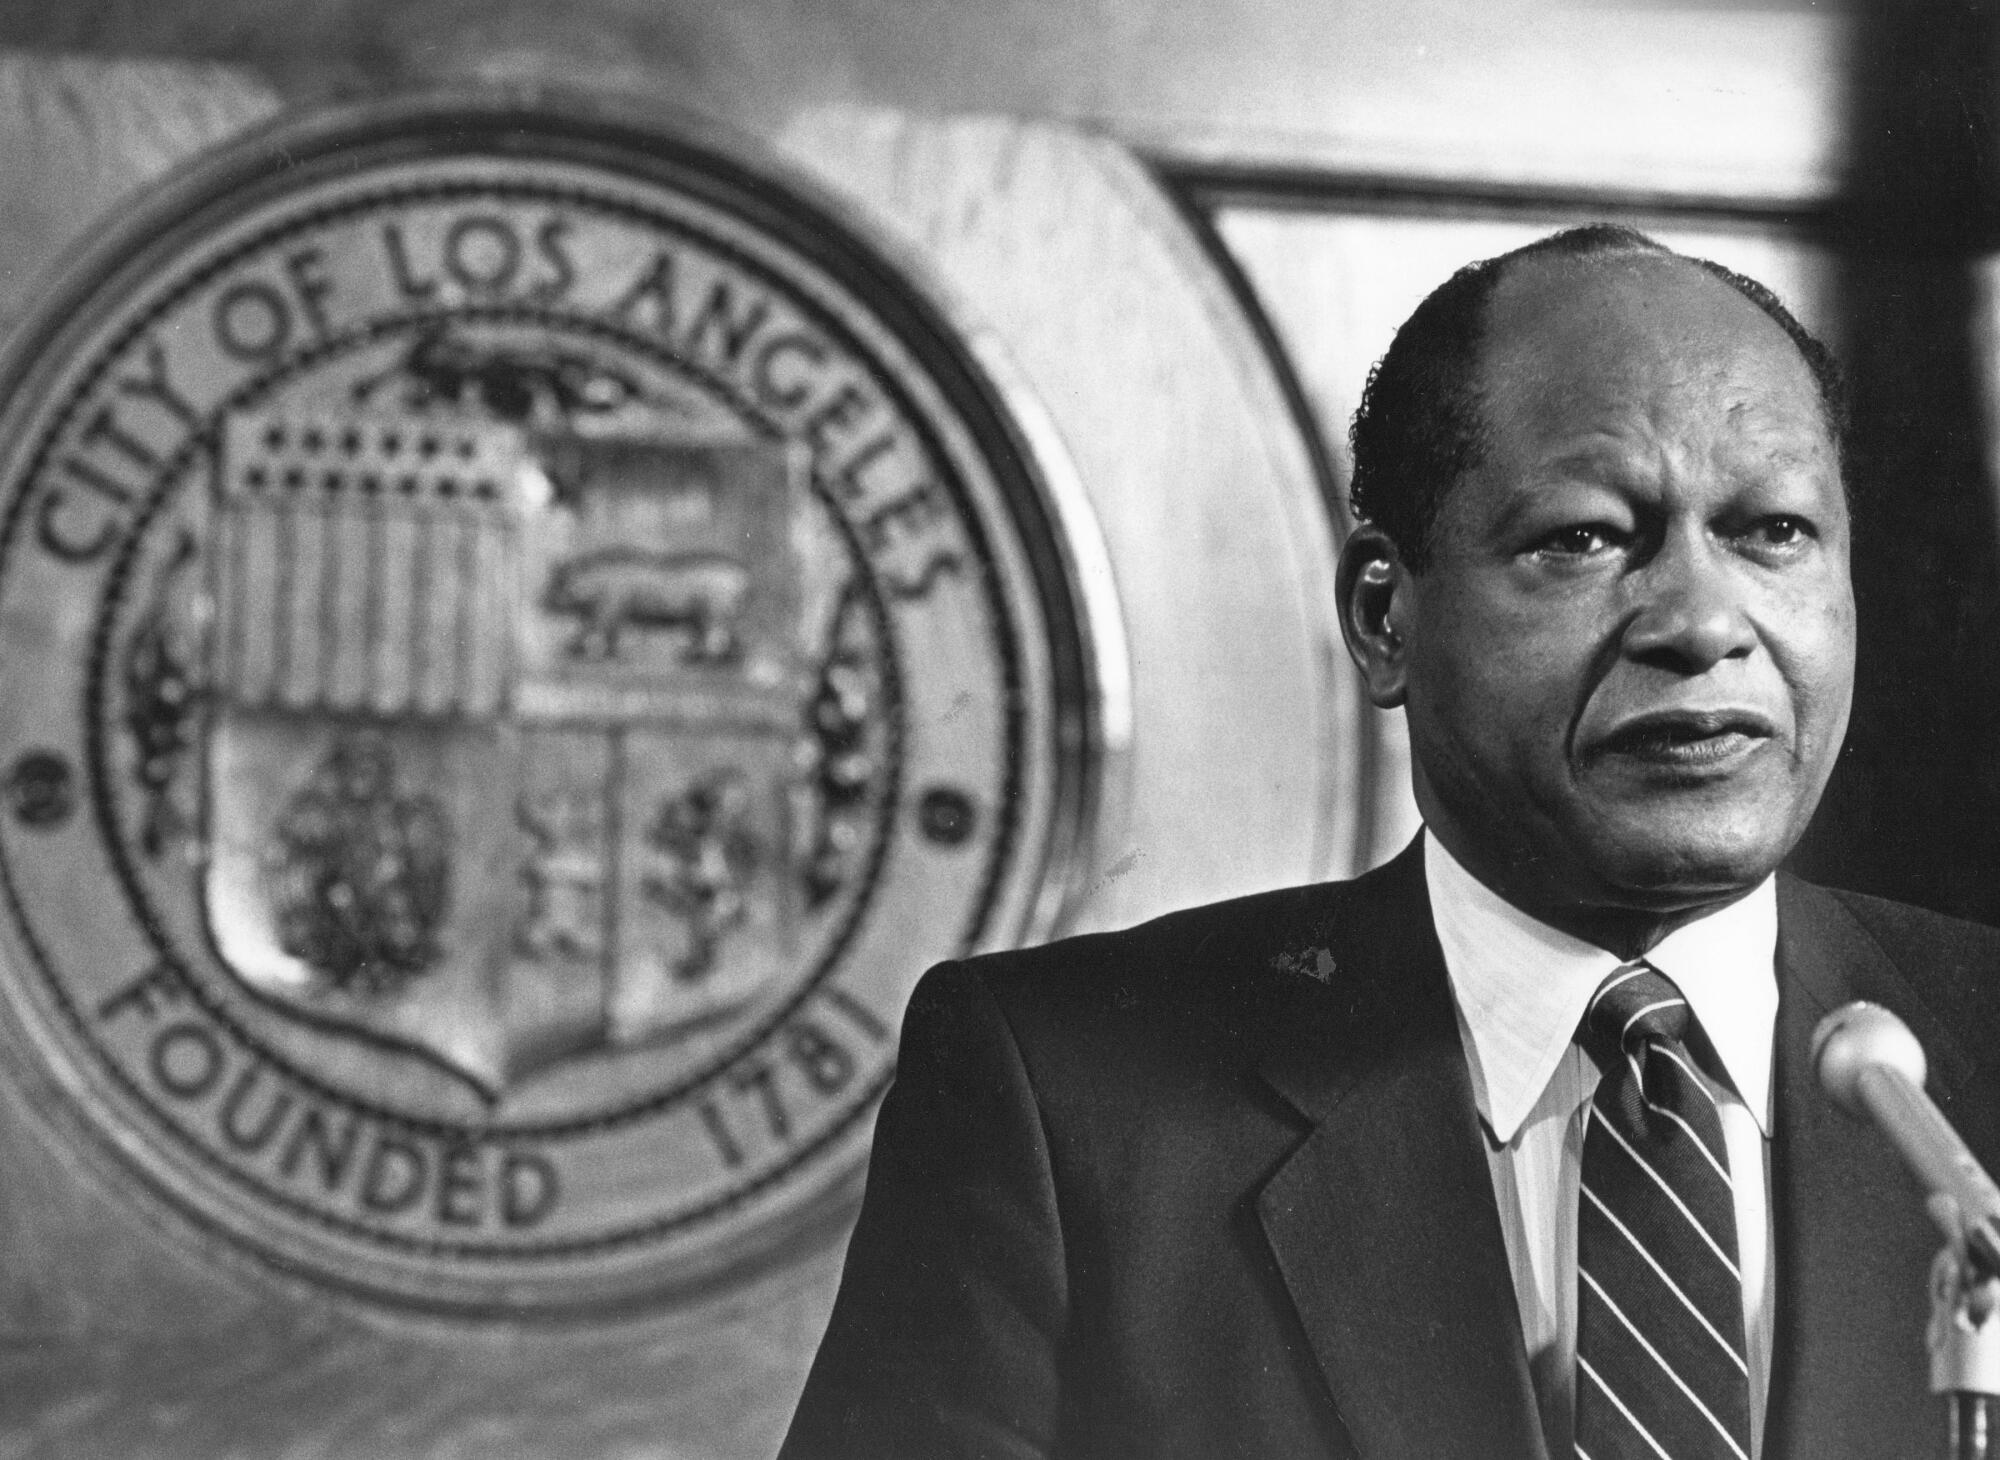 Mayor Tom Bradley stands in from of the Los Angeles city seal